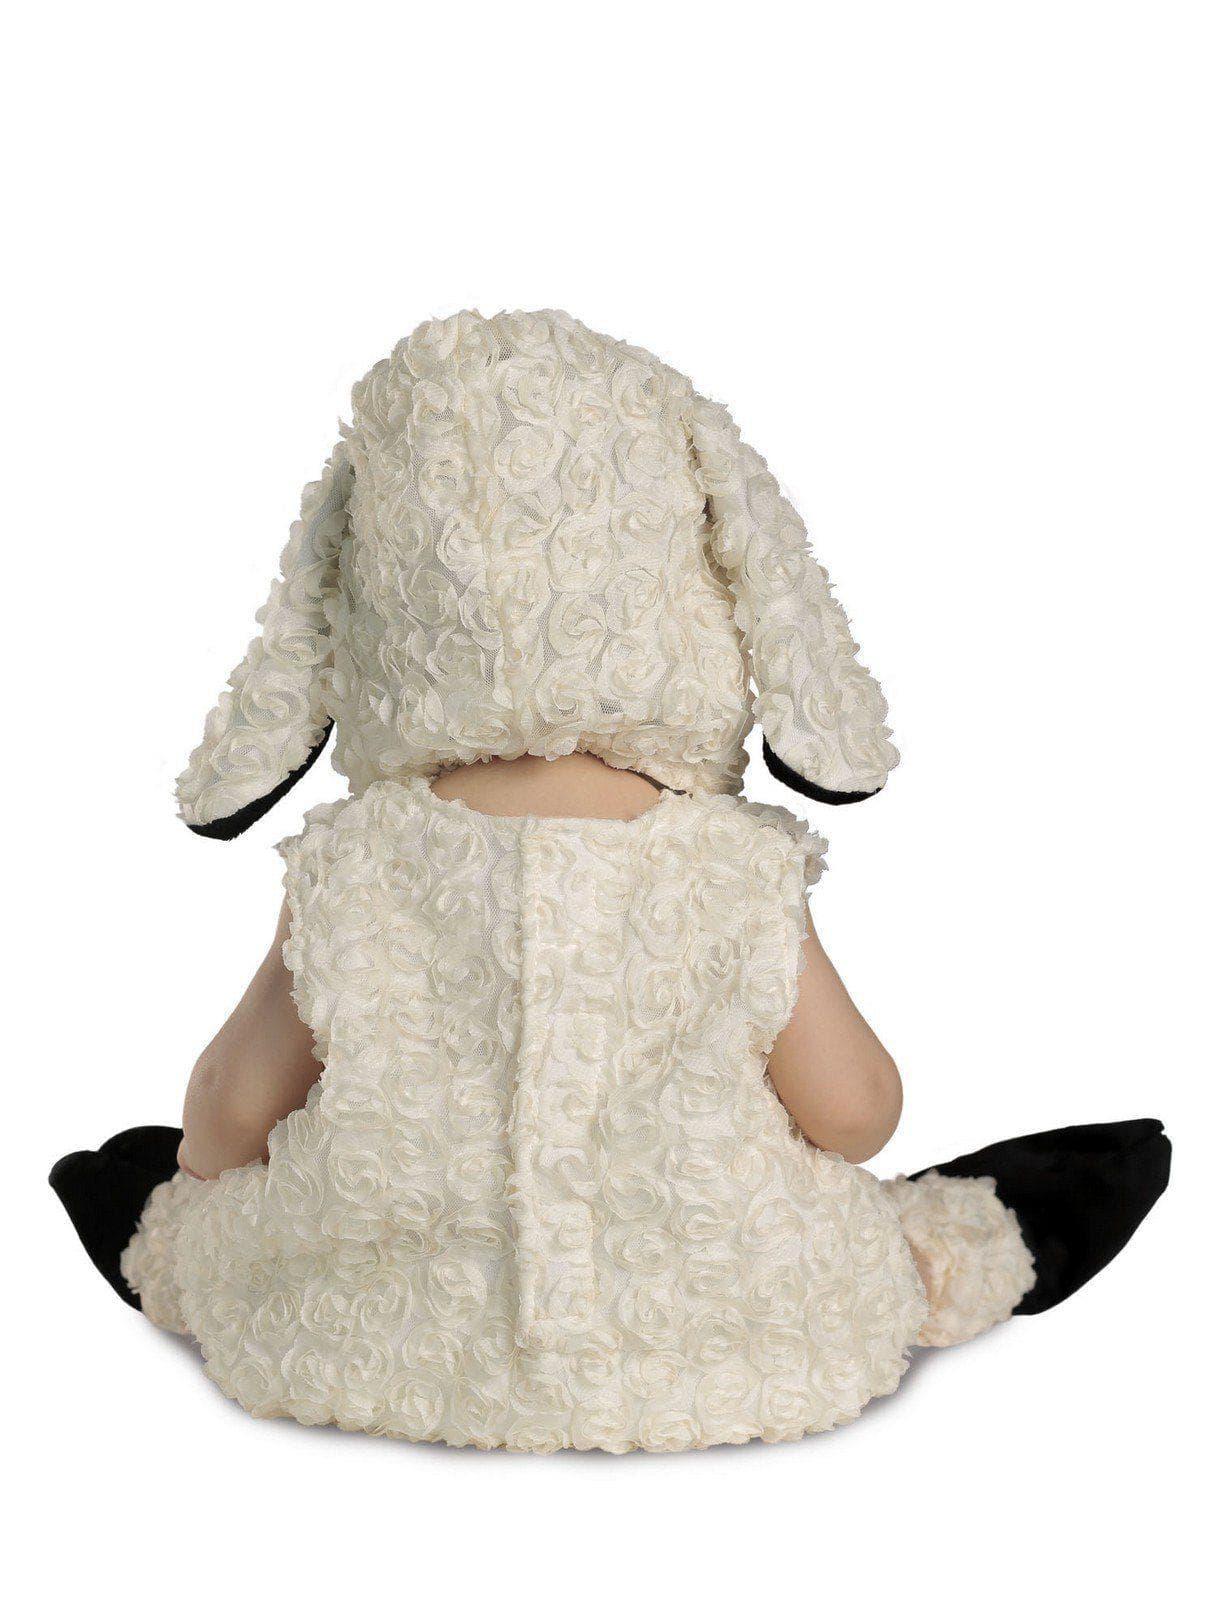 Baby/Toddler Vintage Lamb Costume - costumes.com